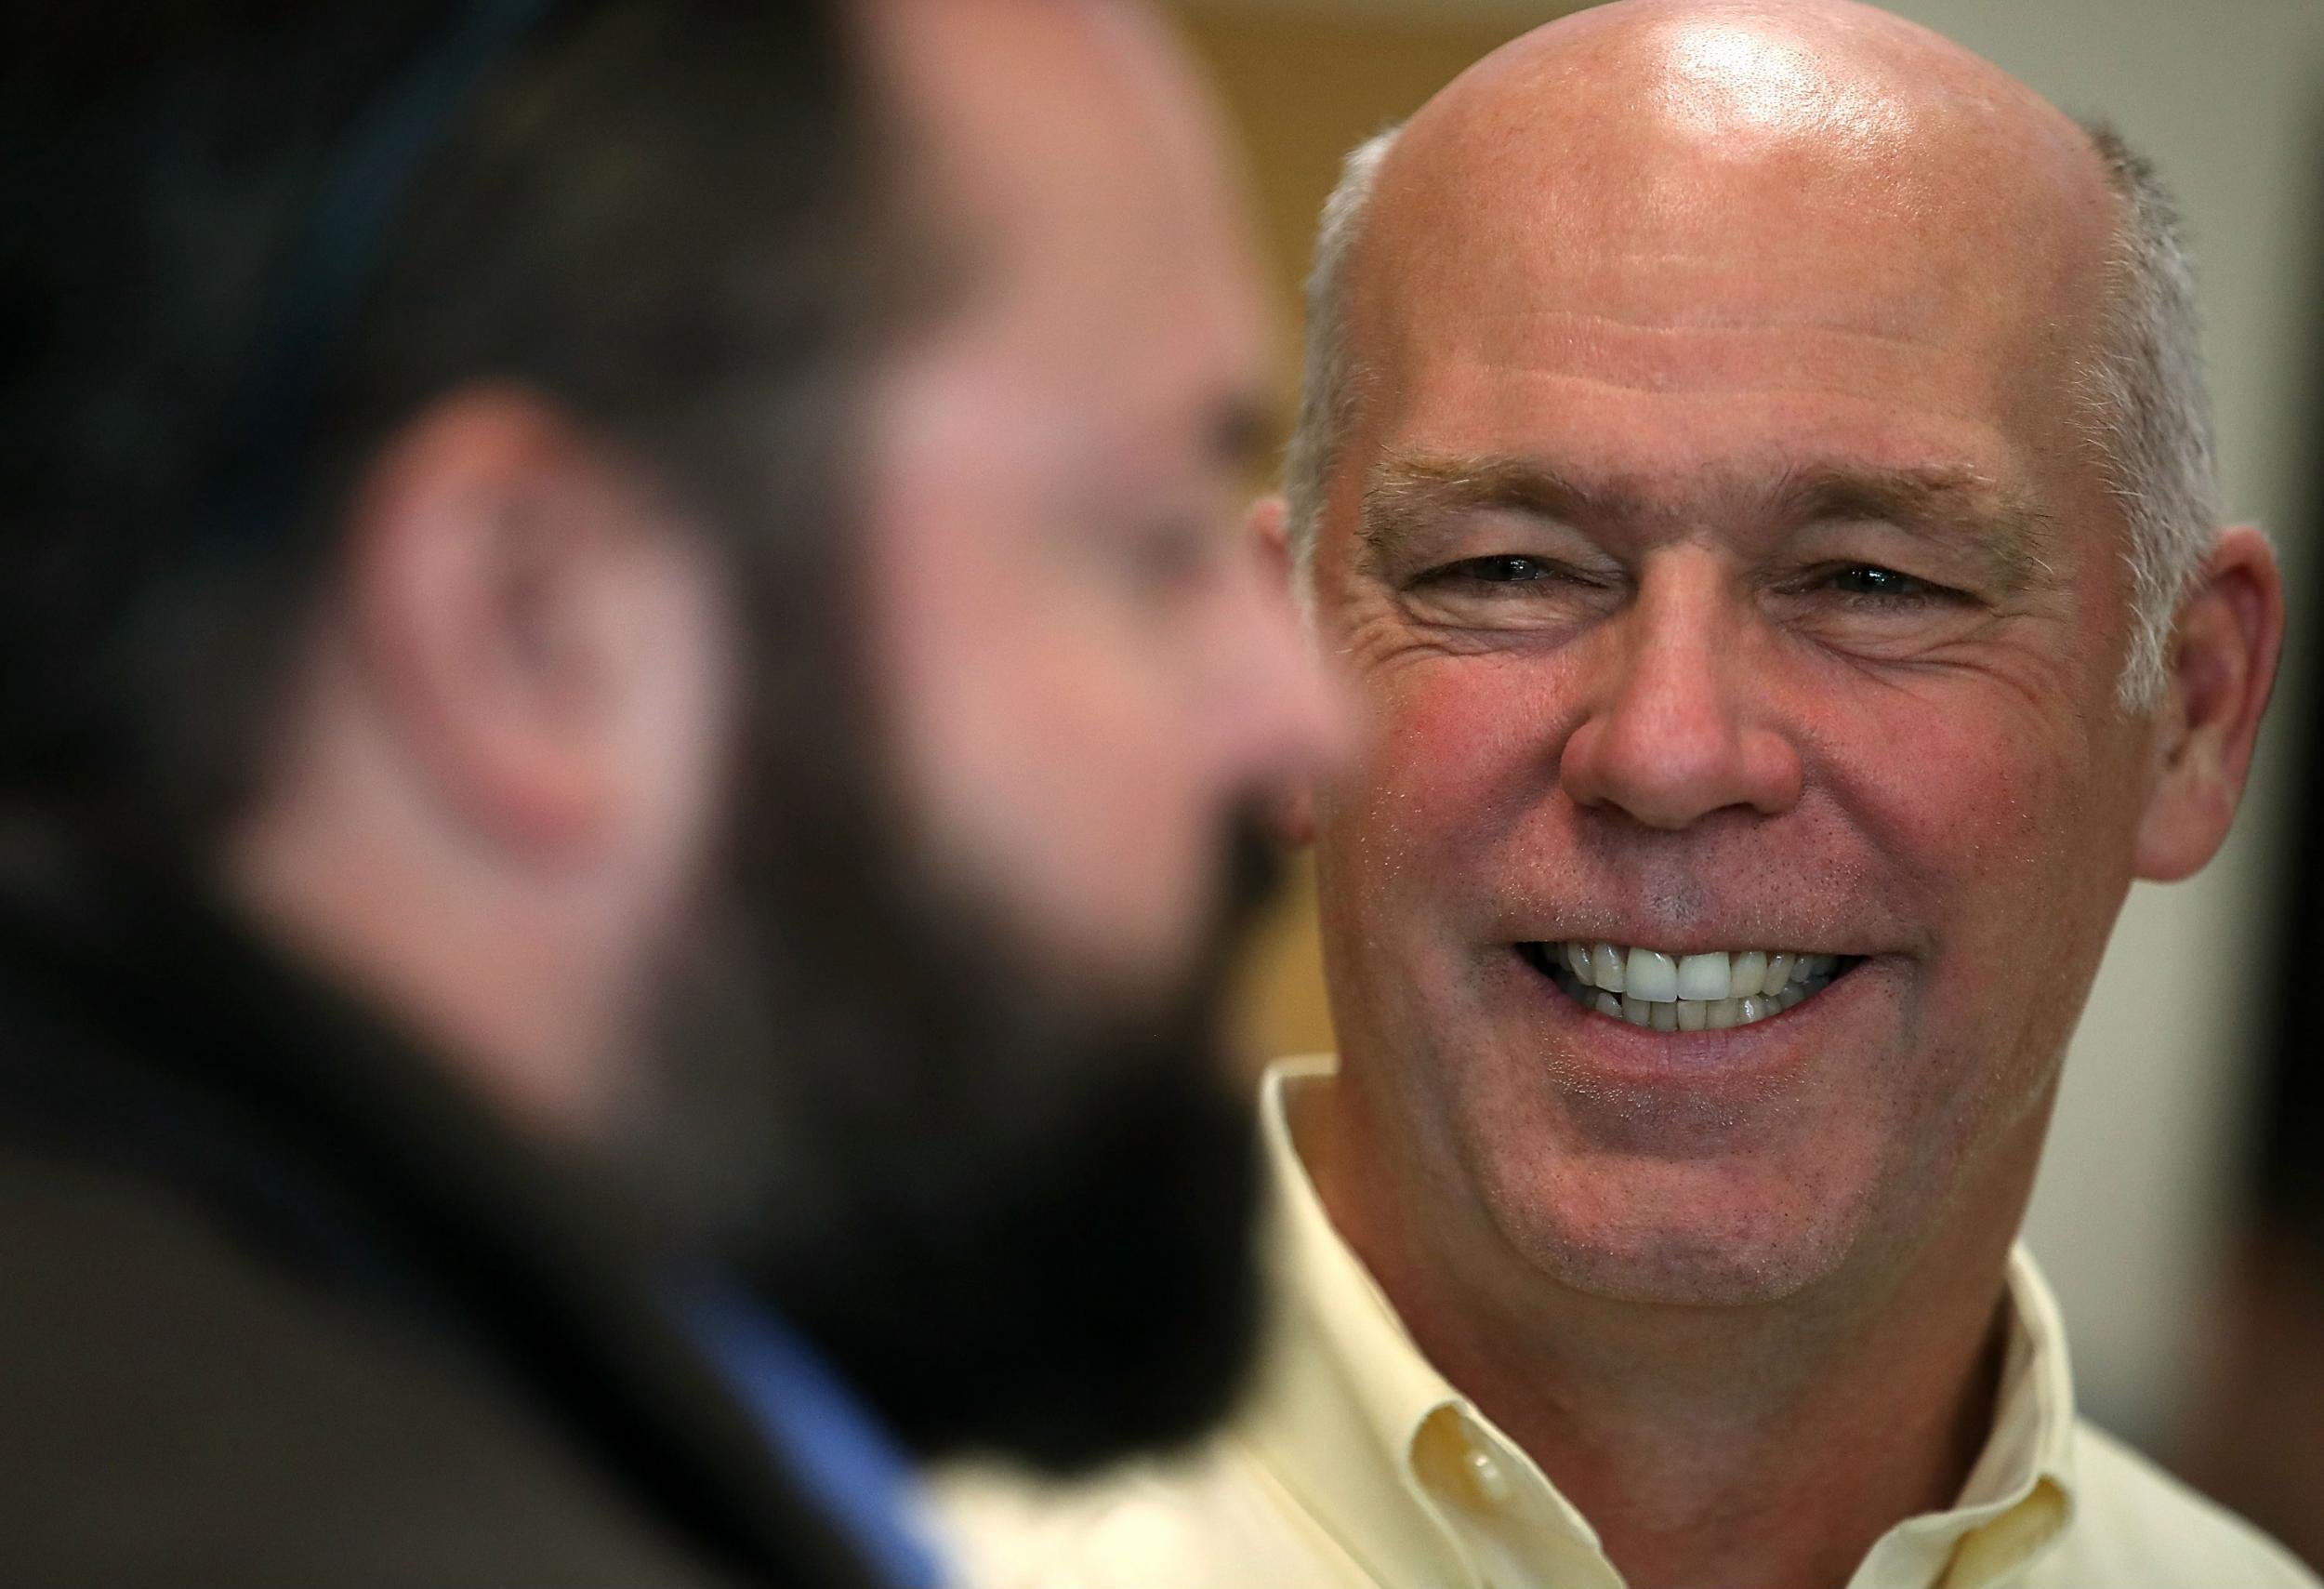 Greg Gianforte has been charged with assaulting a reporter